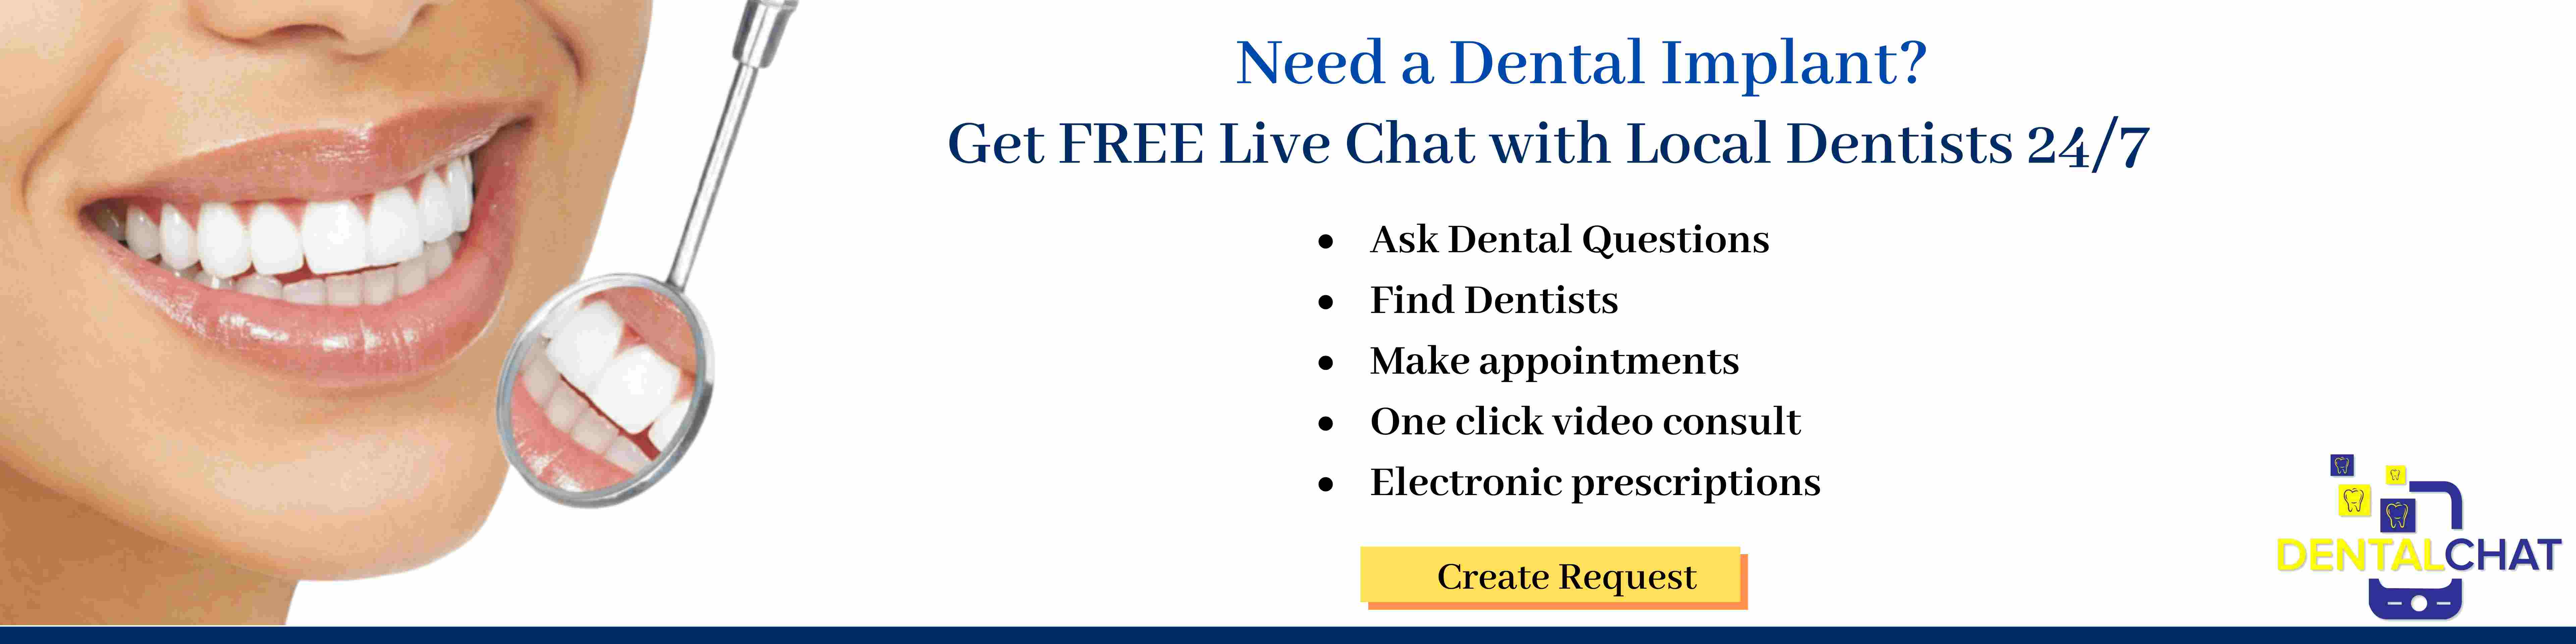 Best cosmetic dentistry information blog, local cosmetic dentist question chat, online cosmetic dental care info questions blogging